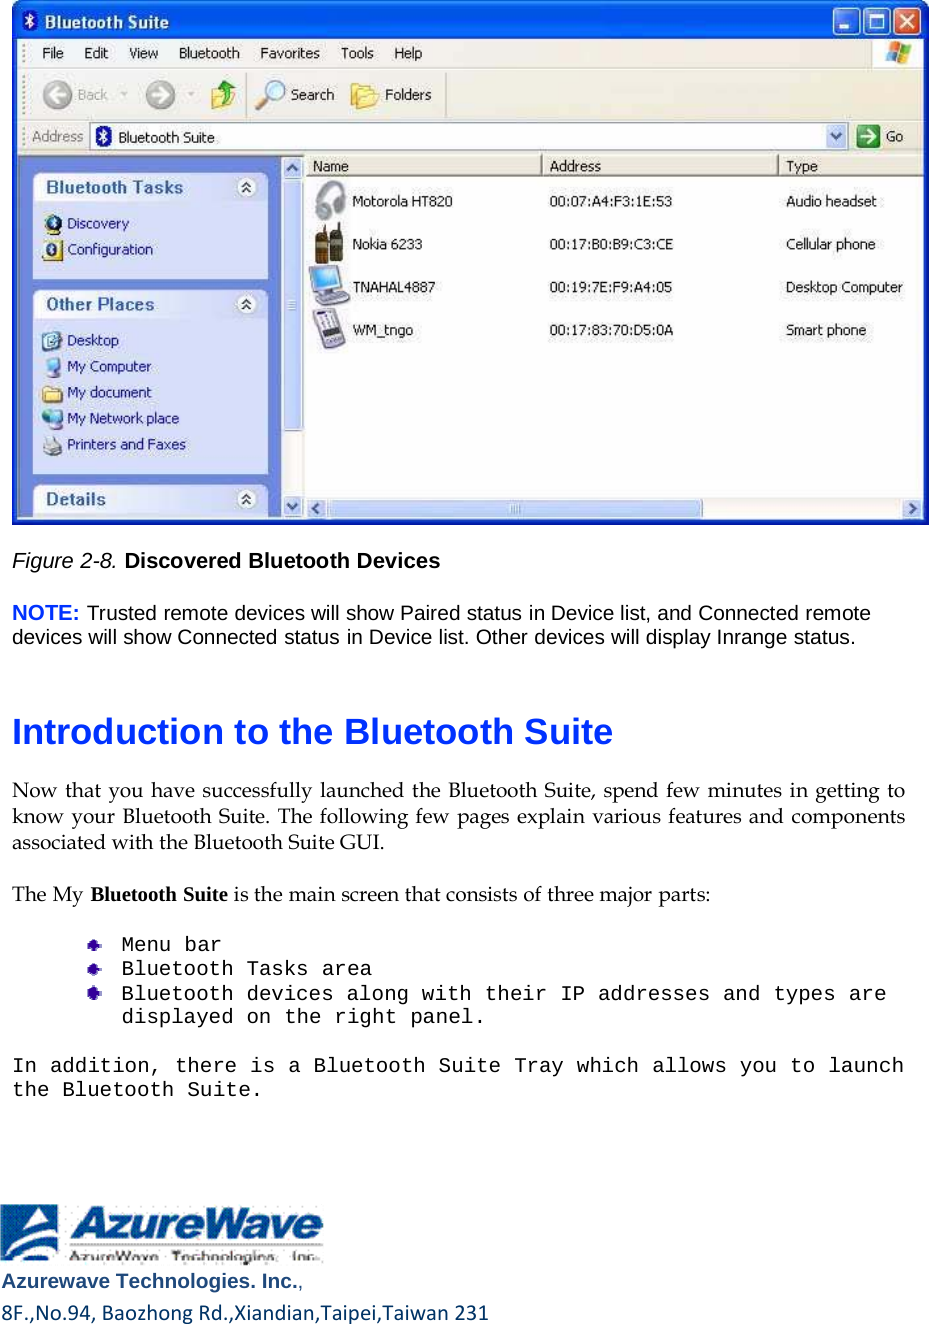        Figure 2-8. Discovered Bluetooth Devices  NOTE: Trusted remote devices will show Paired status in Device list, and Connected remote devices will show Connected status in Device list. Other devices will display Inrange status.    Introduction to the Bluetooth Suite  Now that you have successfully launched the Bluetooth Suite, spend few minutes in getting to know your Bluetooth Suite. The following few pages explain various features and components associated with the Bluetooth Suite GUI.  The My Bluetooth Suite is the main screen that consists of three major parts:  Menu bar Bluetooth Tasks area Bluetooth devices along with their IP addresses and types are displayed on the right panel.  In addition, there is a Bluetooth Suite Tray which allows you to launch the Bluetooth Suite.          Azurewave Technologies. Inc.,8F.,No.94,BaozhongRd.,Xiandian,Taipei,Taiwan231 